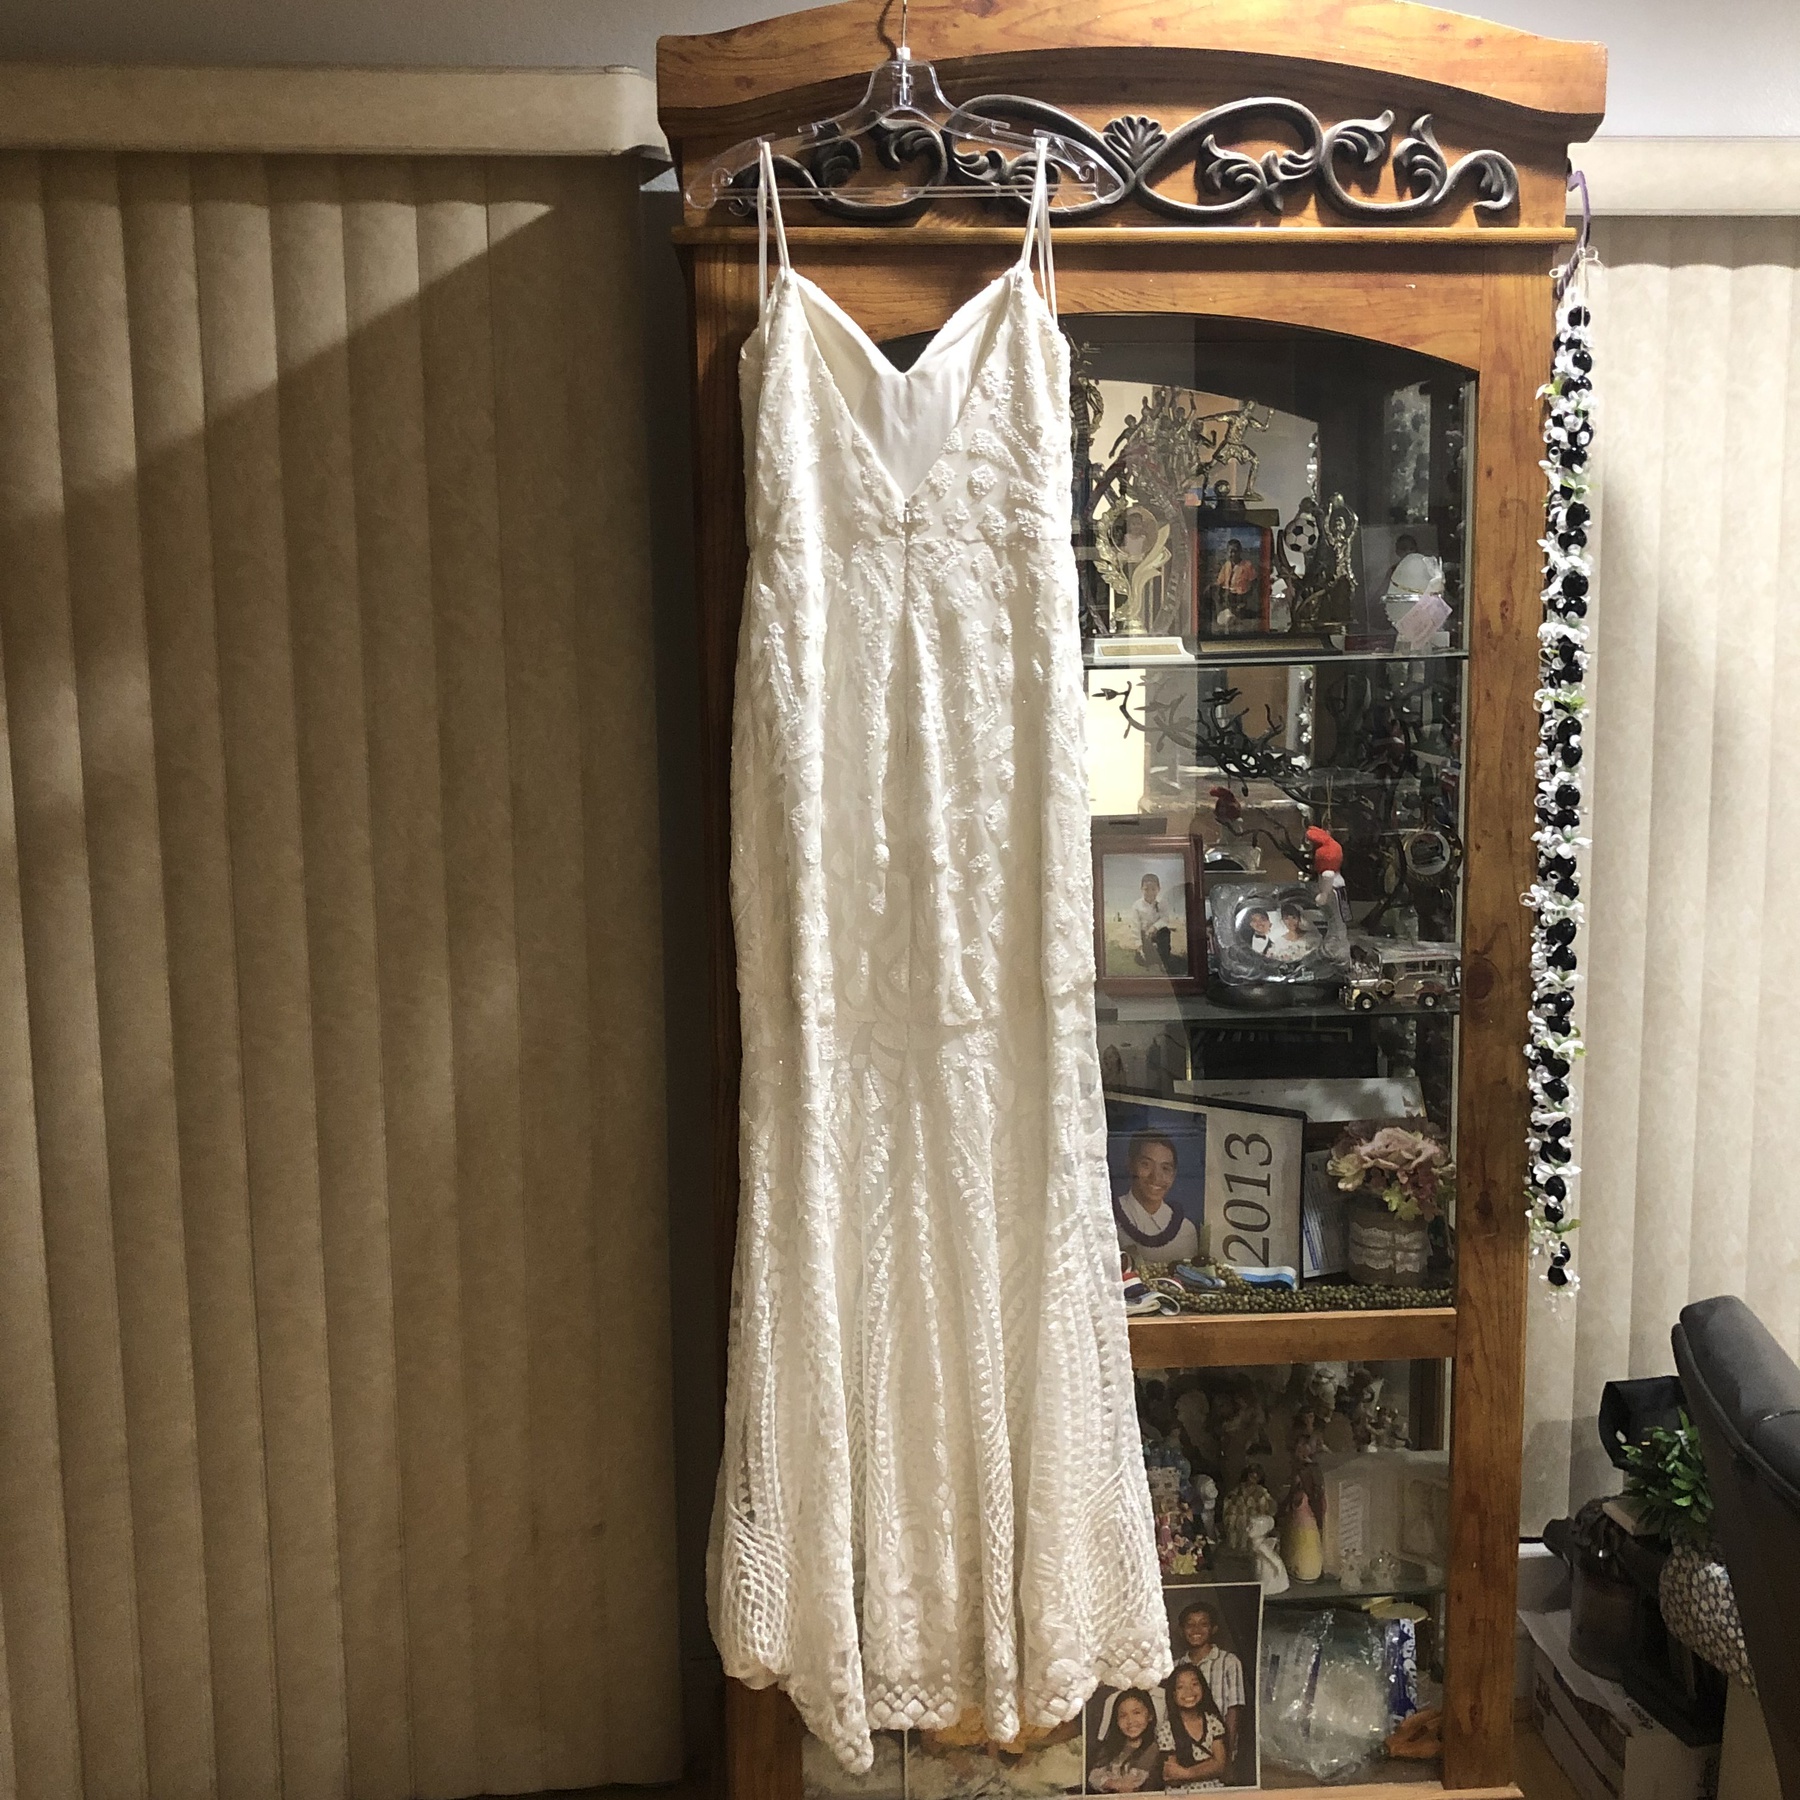 Size 6 Wedding White Floor Length Maxi on Queenly